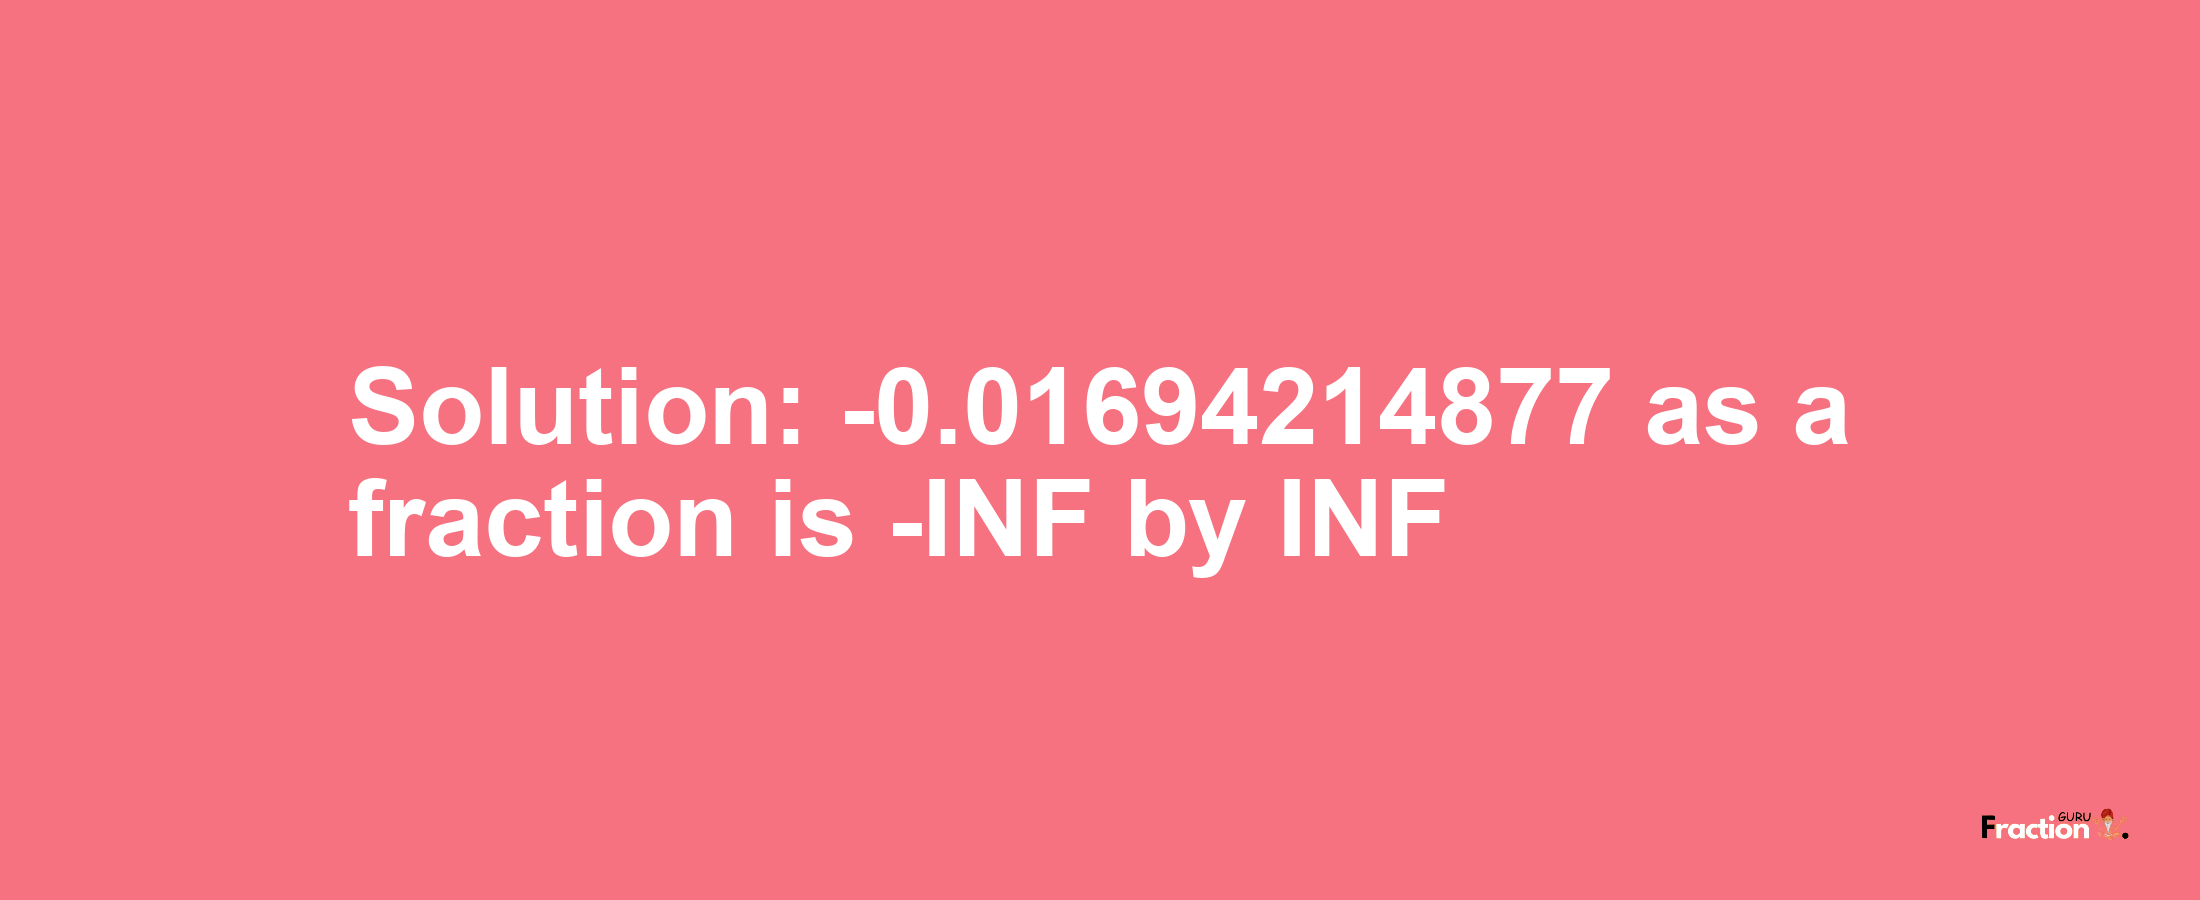 Solution:-0.01694214877 as a fraction is -INF/INF